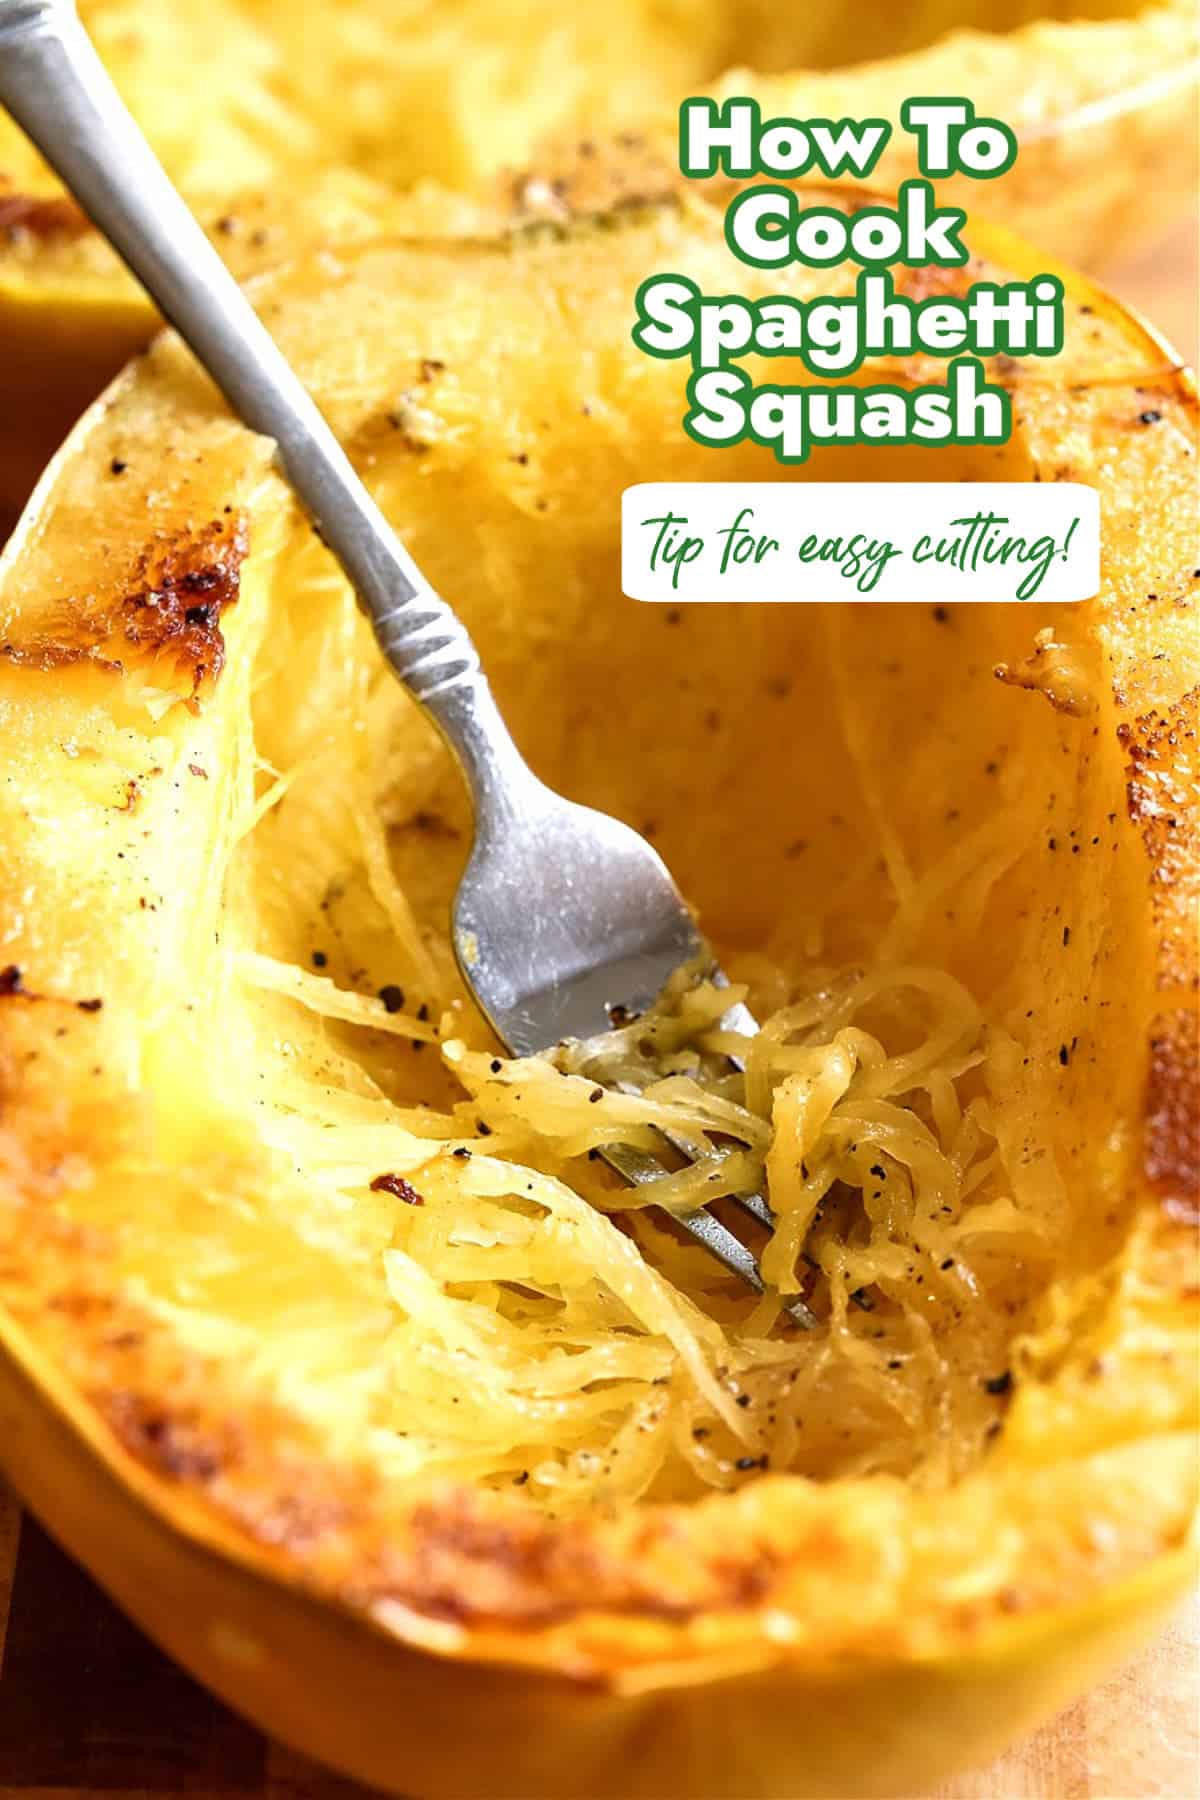 image of spaghetti squash with fork